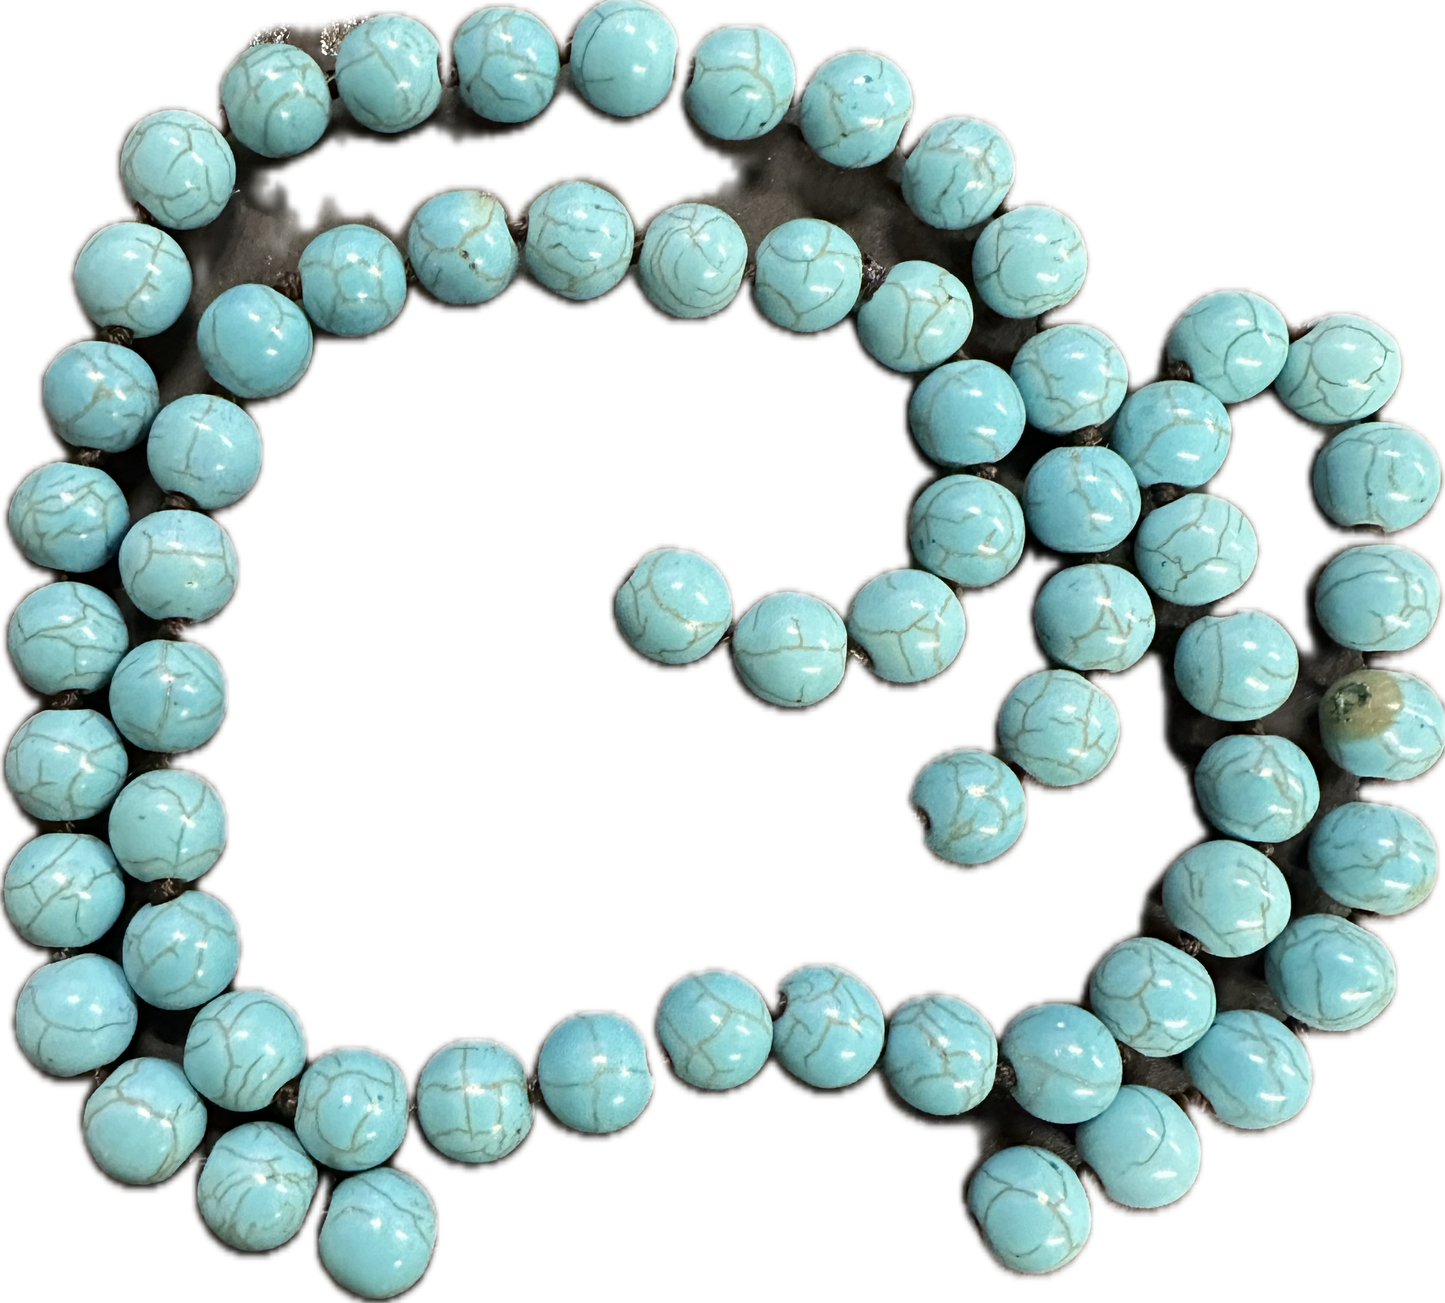 32"STRAND OF 1/4' TURQUOISE BEADS